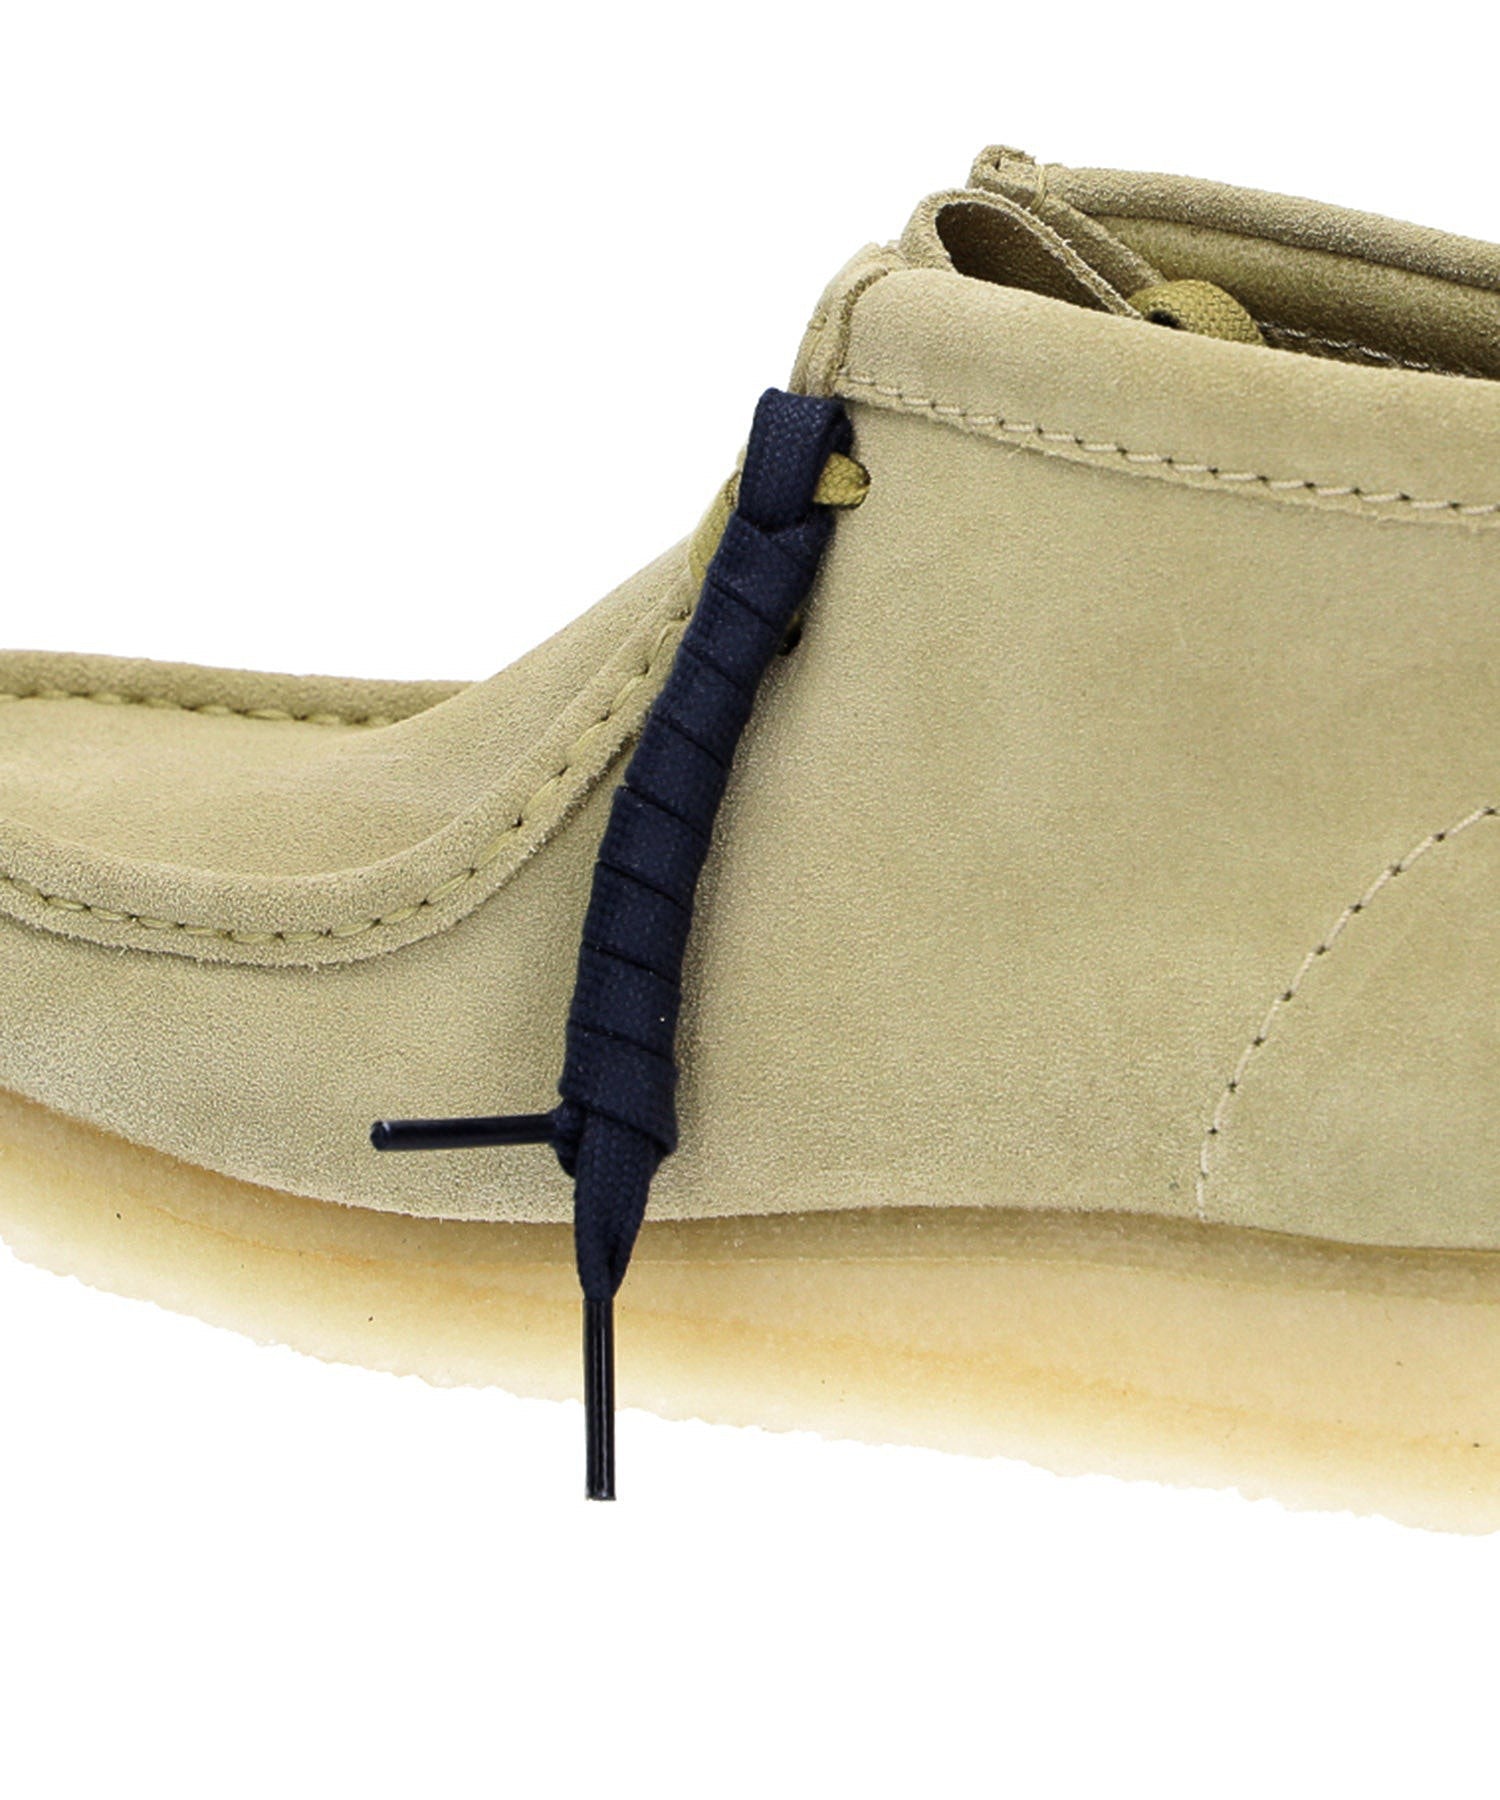 CLARKS 26155520 Wallabee Boot. Maple Suede X-girl